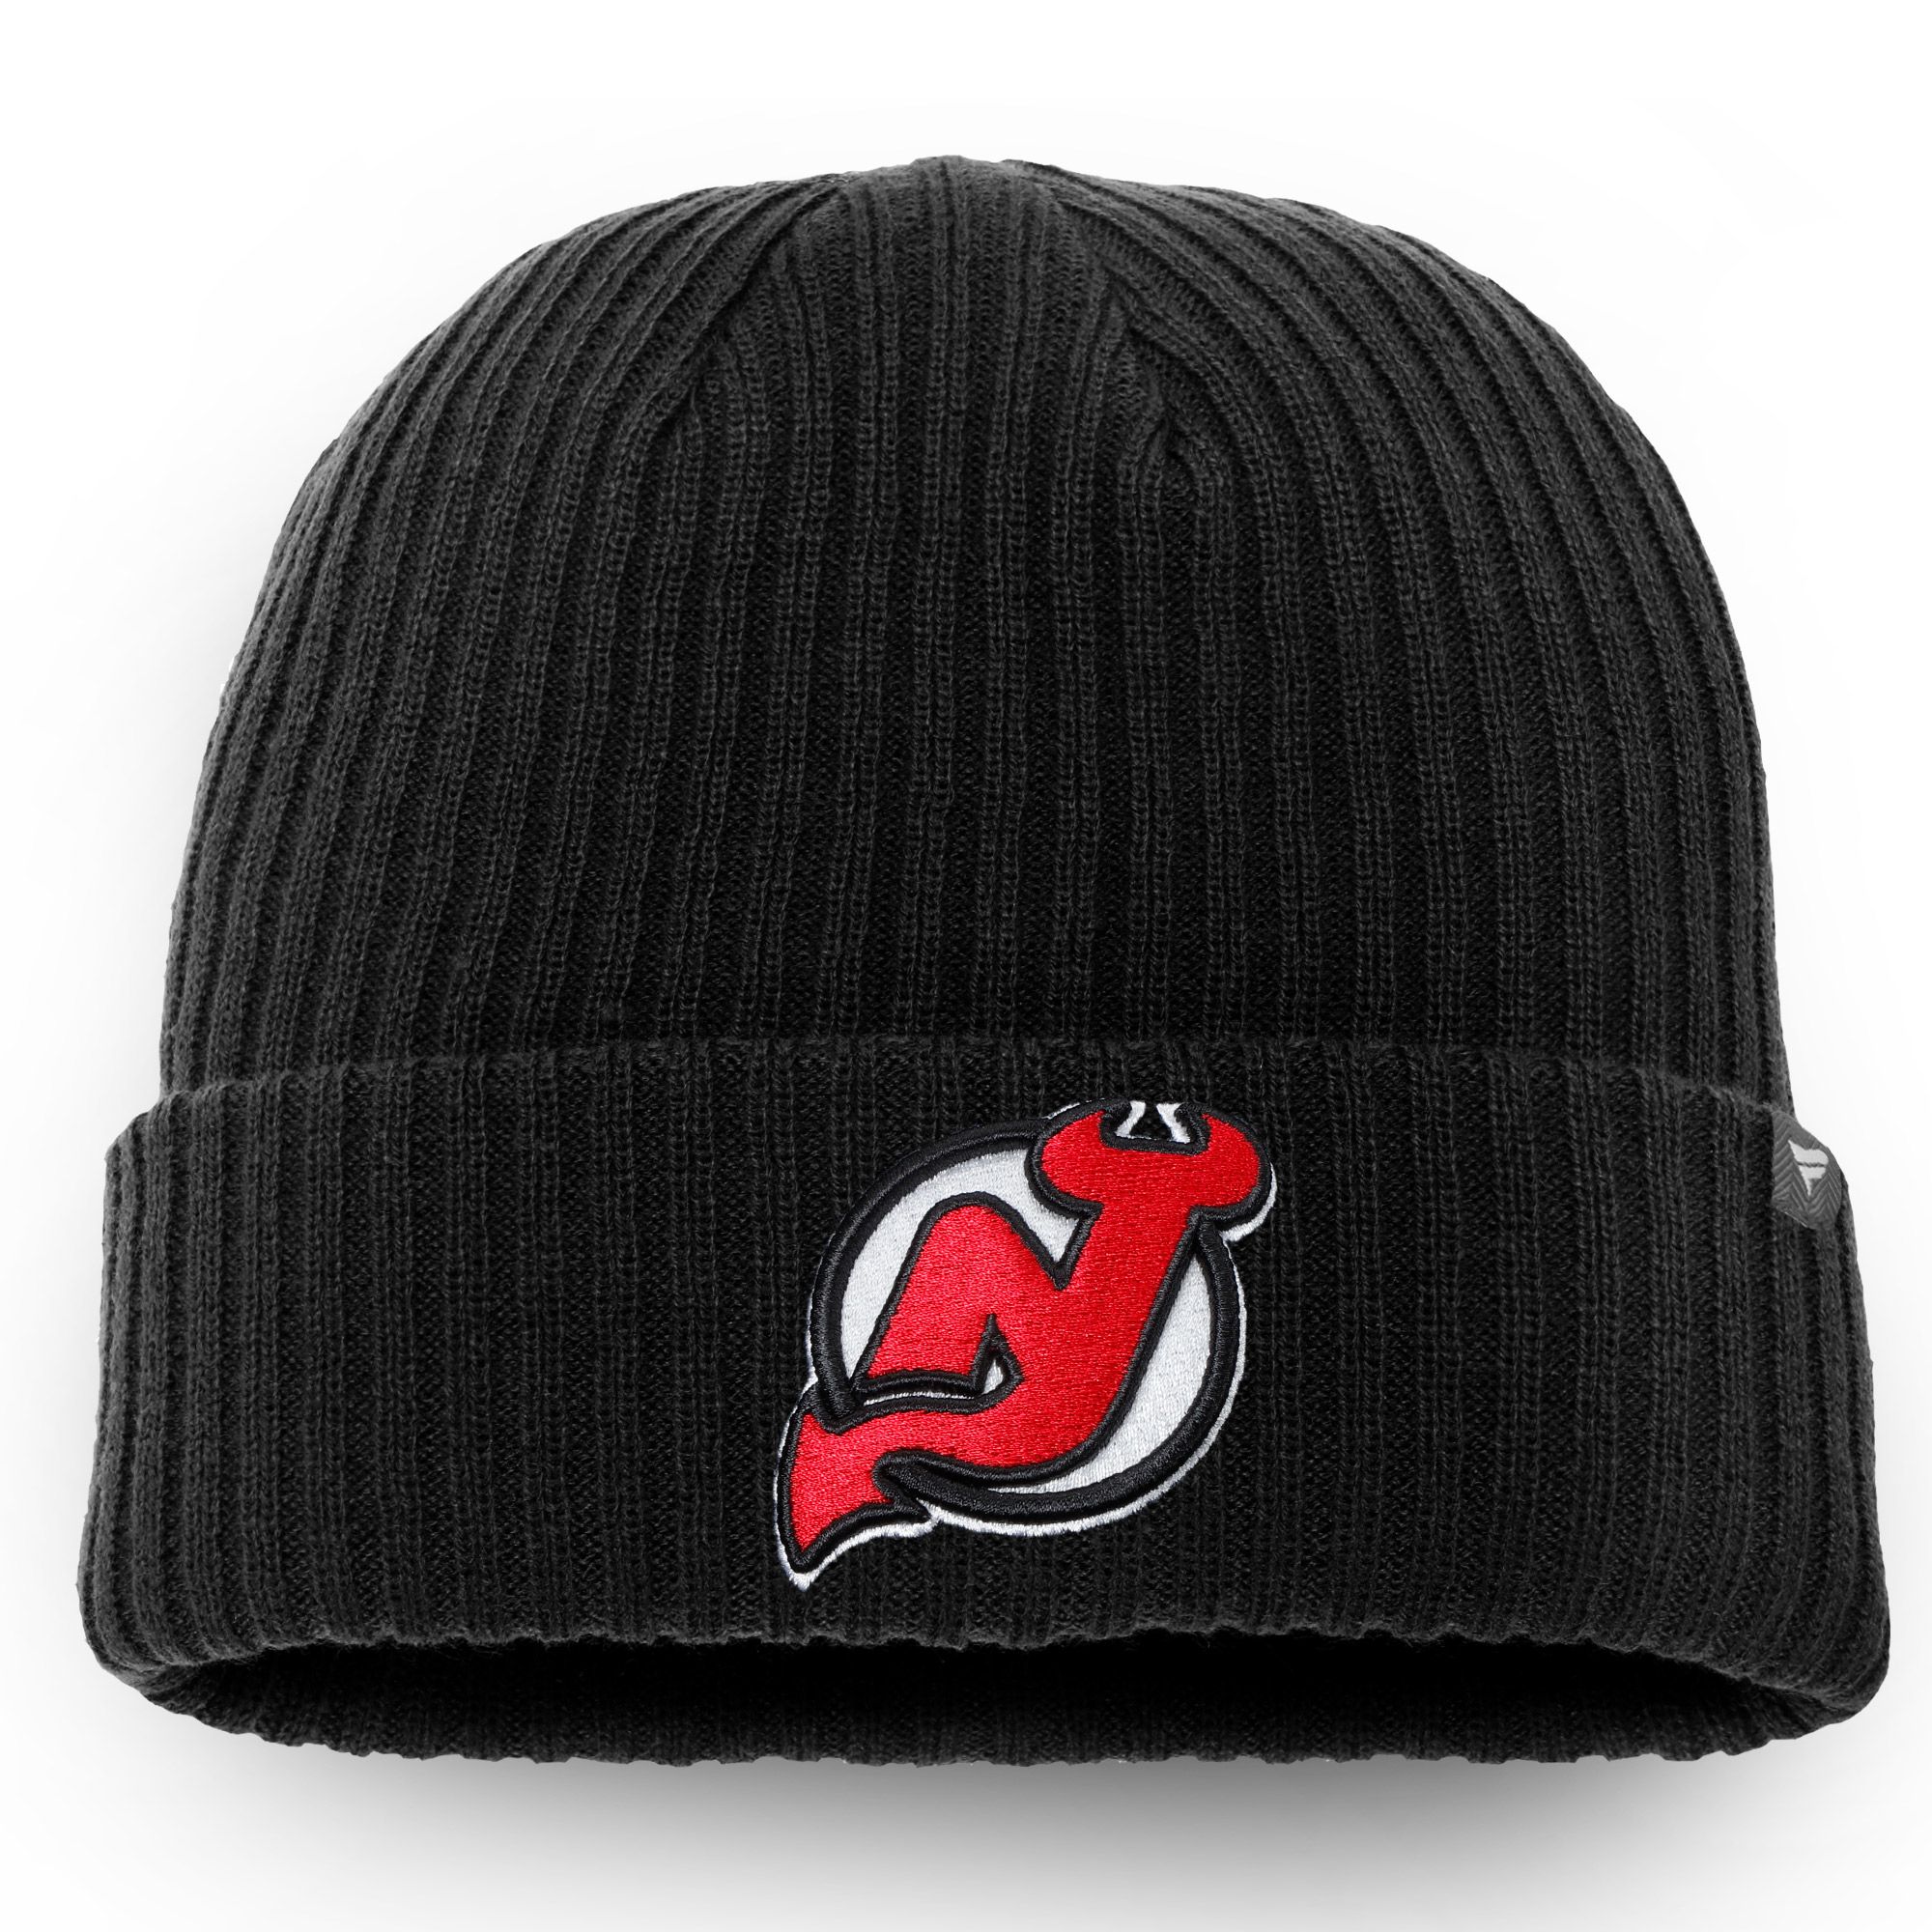 Fanatics Branded White/Red New Jersey Devils Authentic Pro Draft Cuffed Knit Hat with Pom